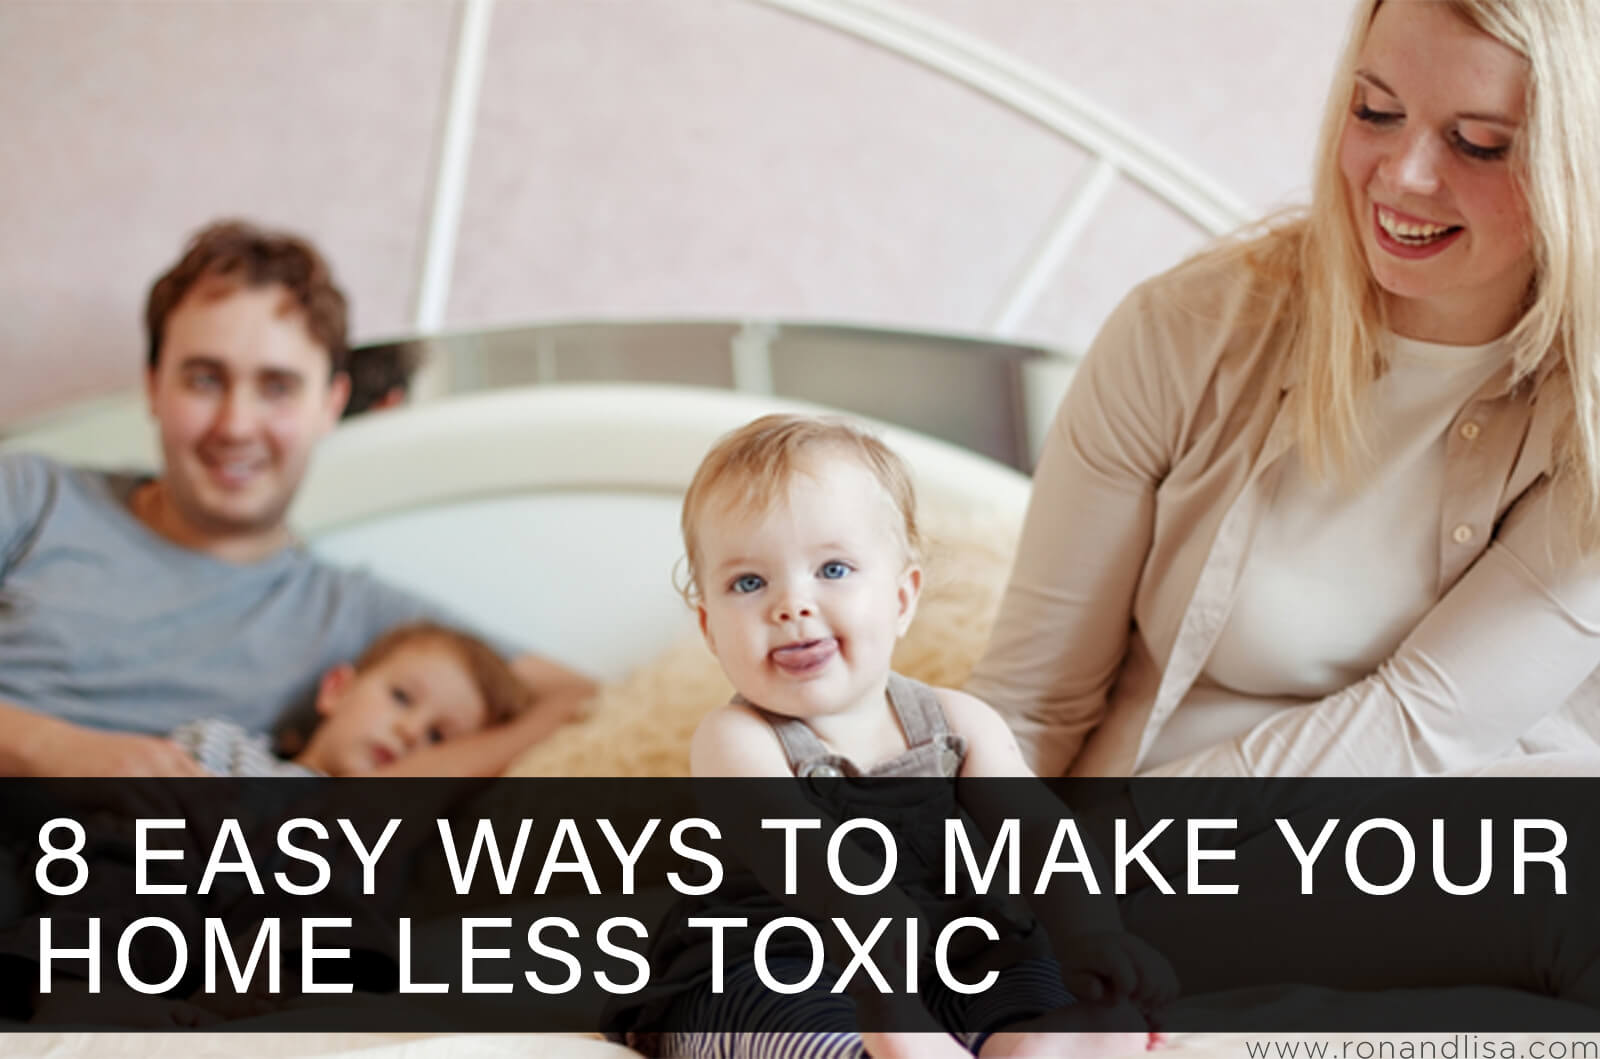 8 Easy Ways To Make Your Home Less Toxic